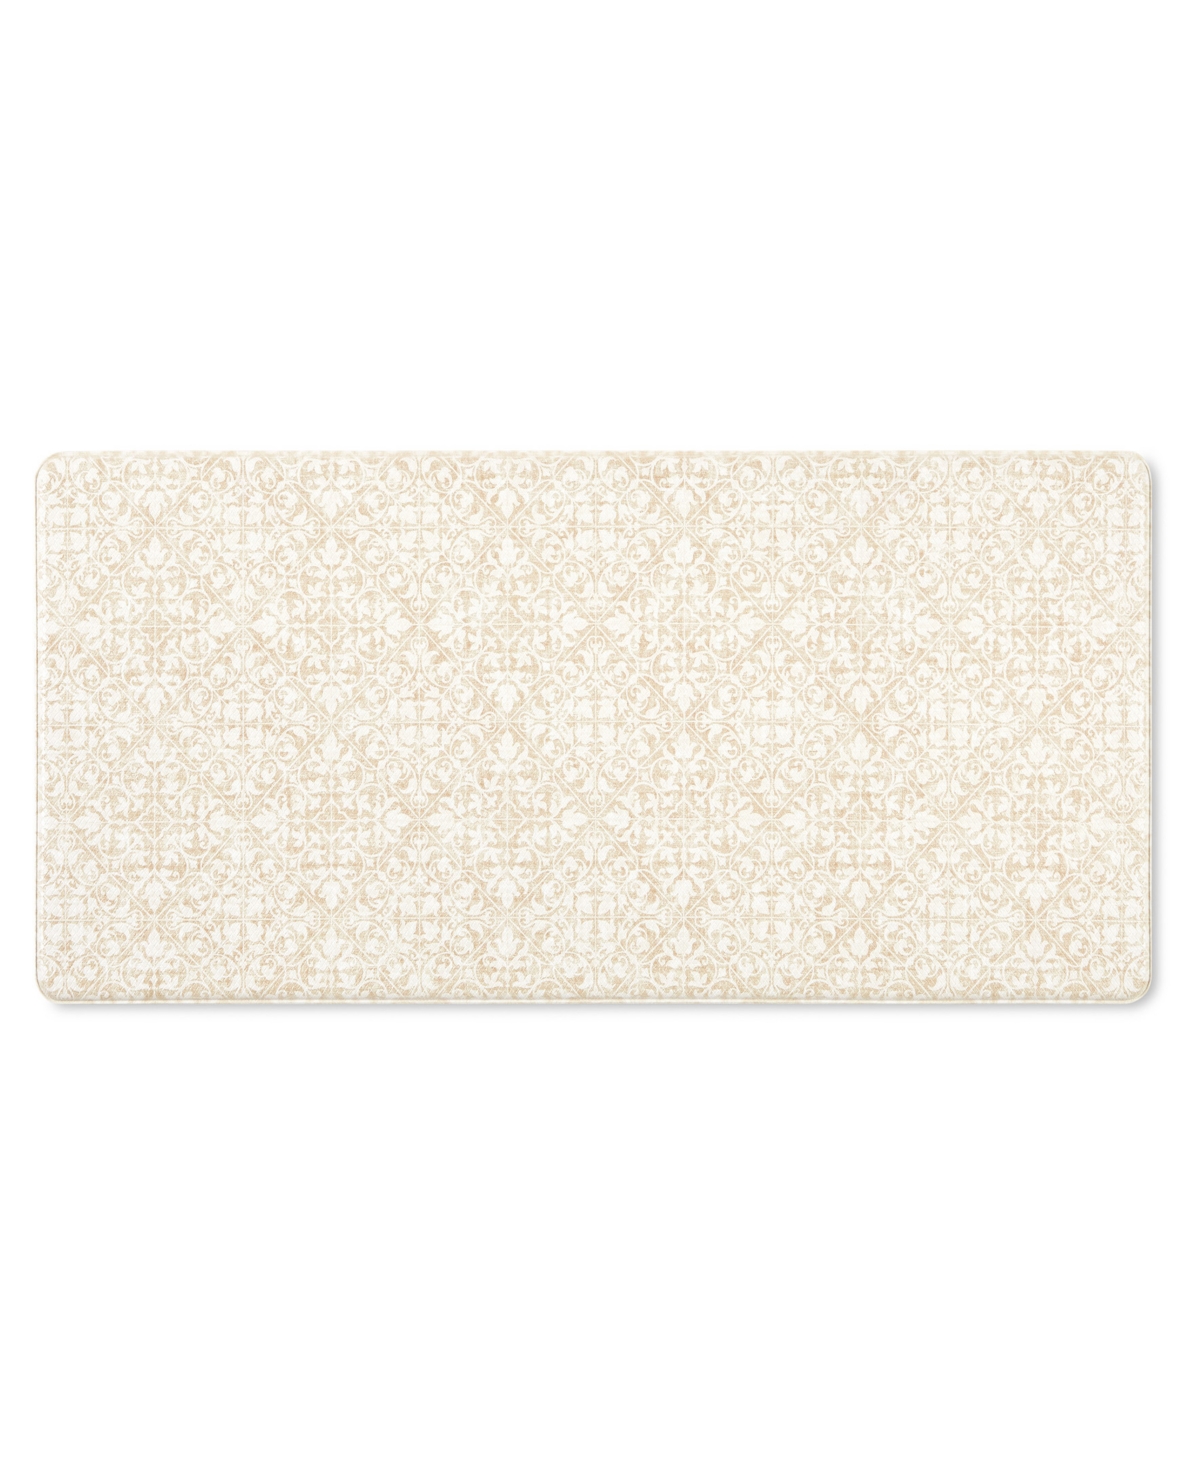 Town & Country Living Basics Comfort Plus Kitchen Mat 26782 1'6" X 3'3" Area Rug In Beige